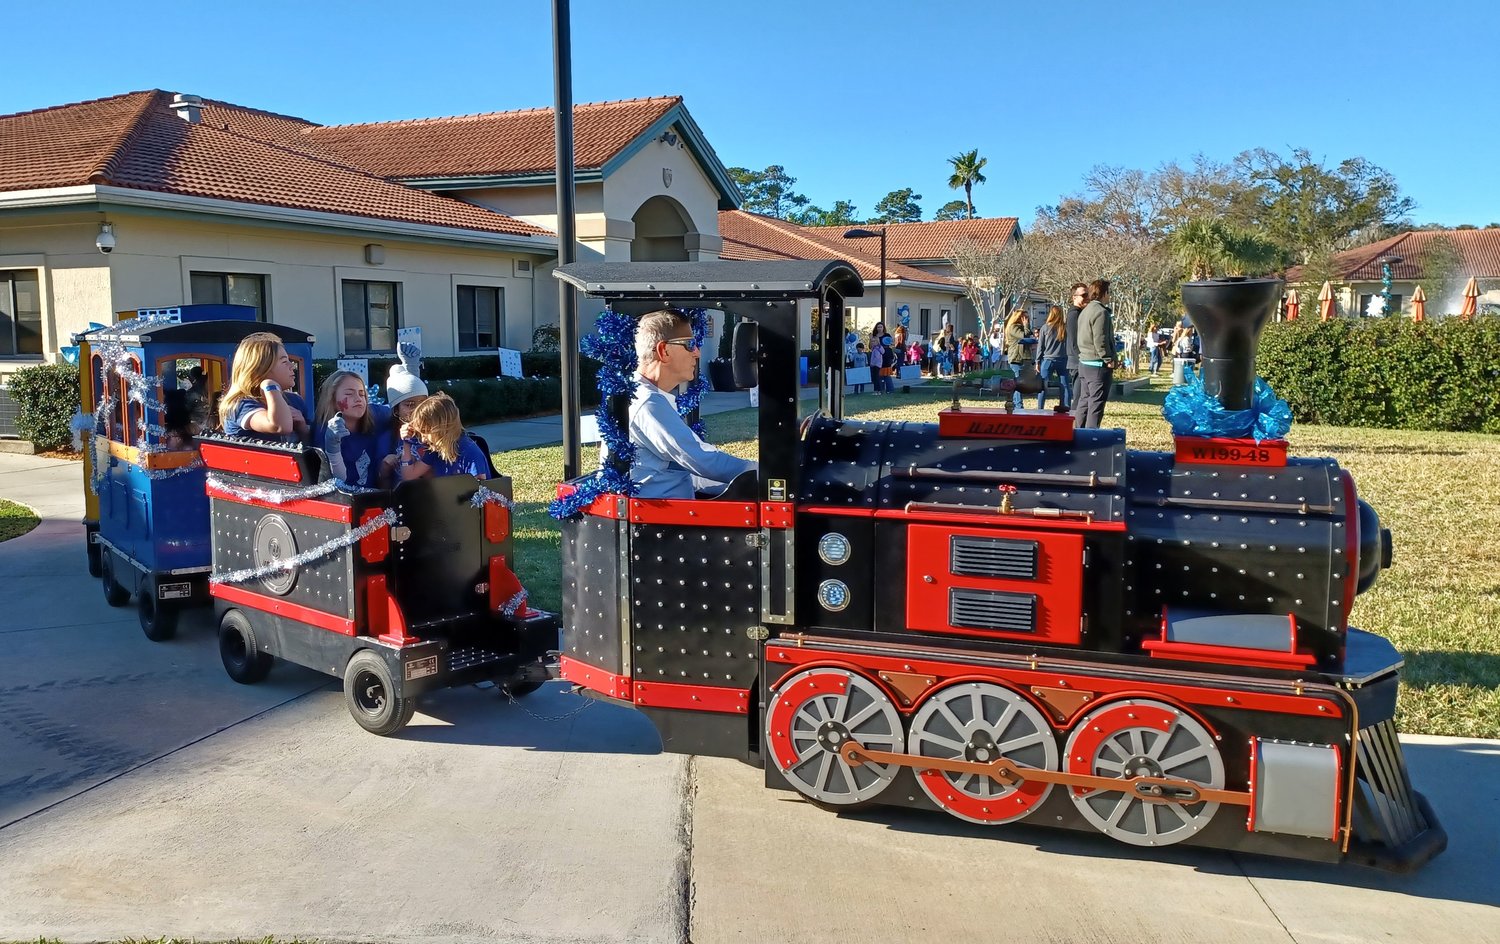 The Winter Fest train was very popular among the students.